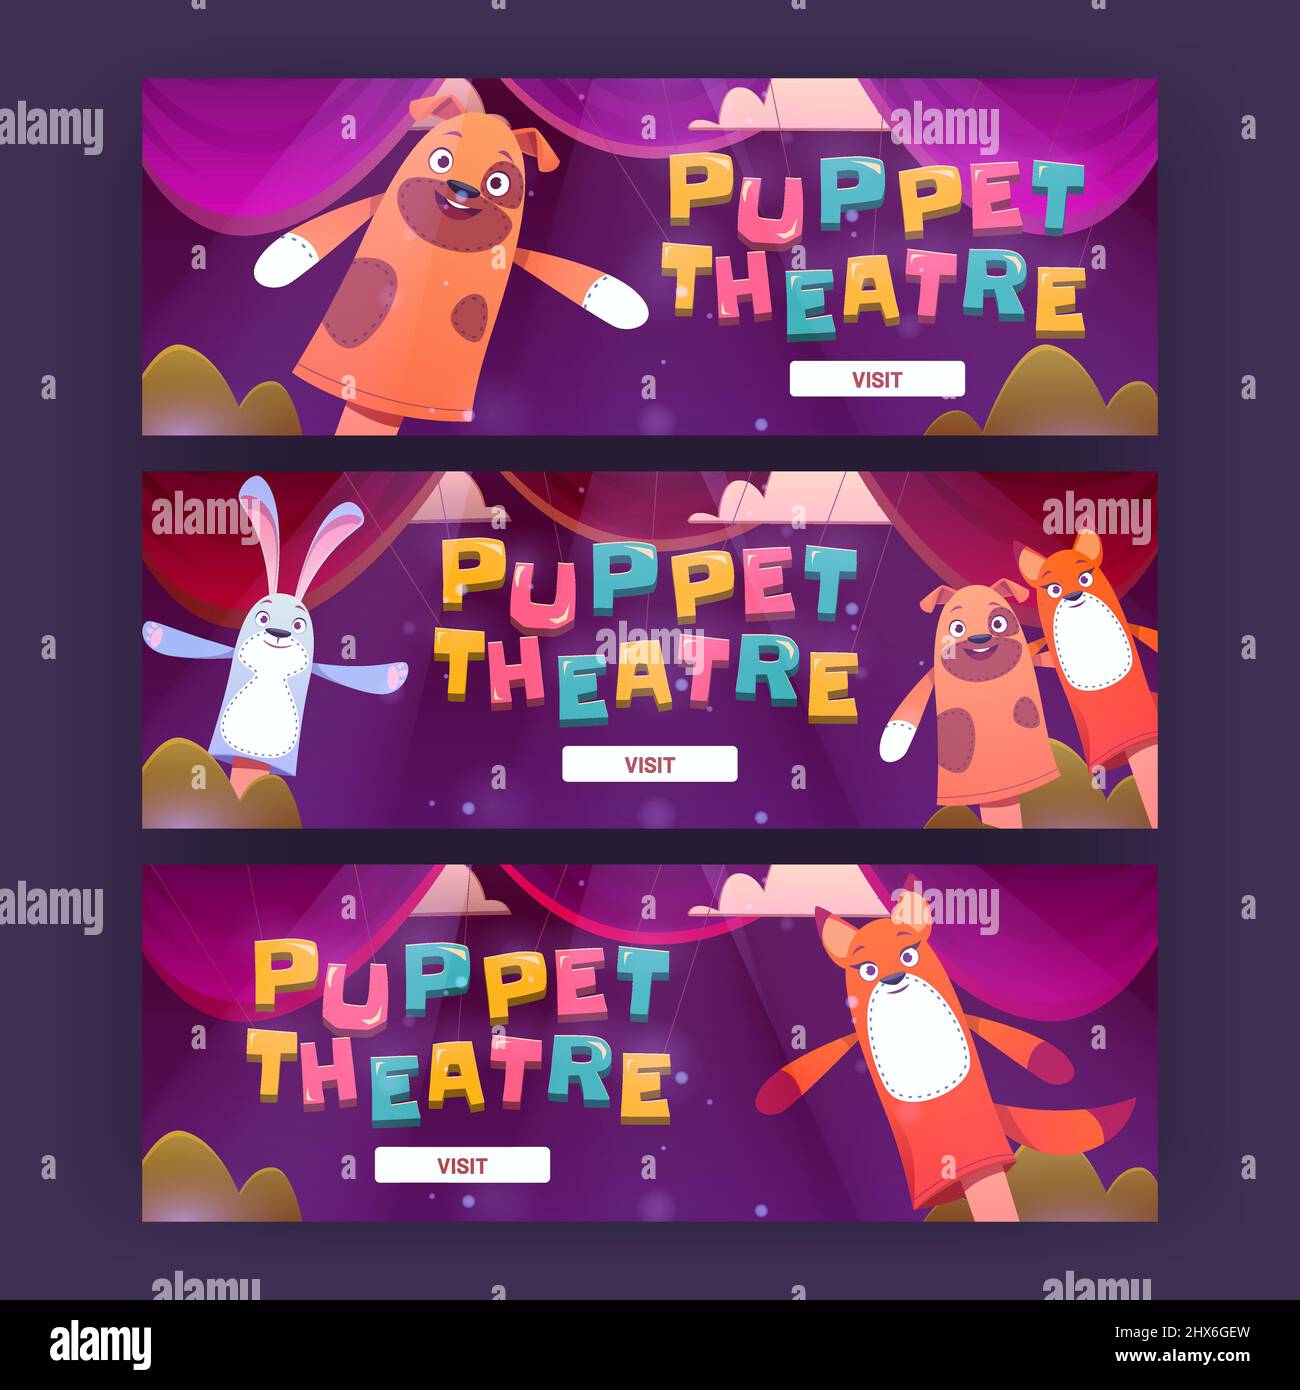 Puppet theater cartoon web banners, funny dolls perform show or fairy tale story for children on stage. Hand toys dog, rabbit and fox personages theatrical performance for kids, Vector illustration Stock Vector